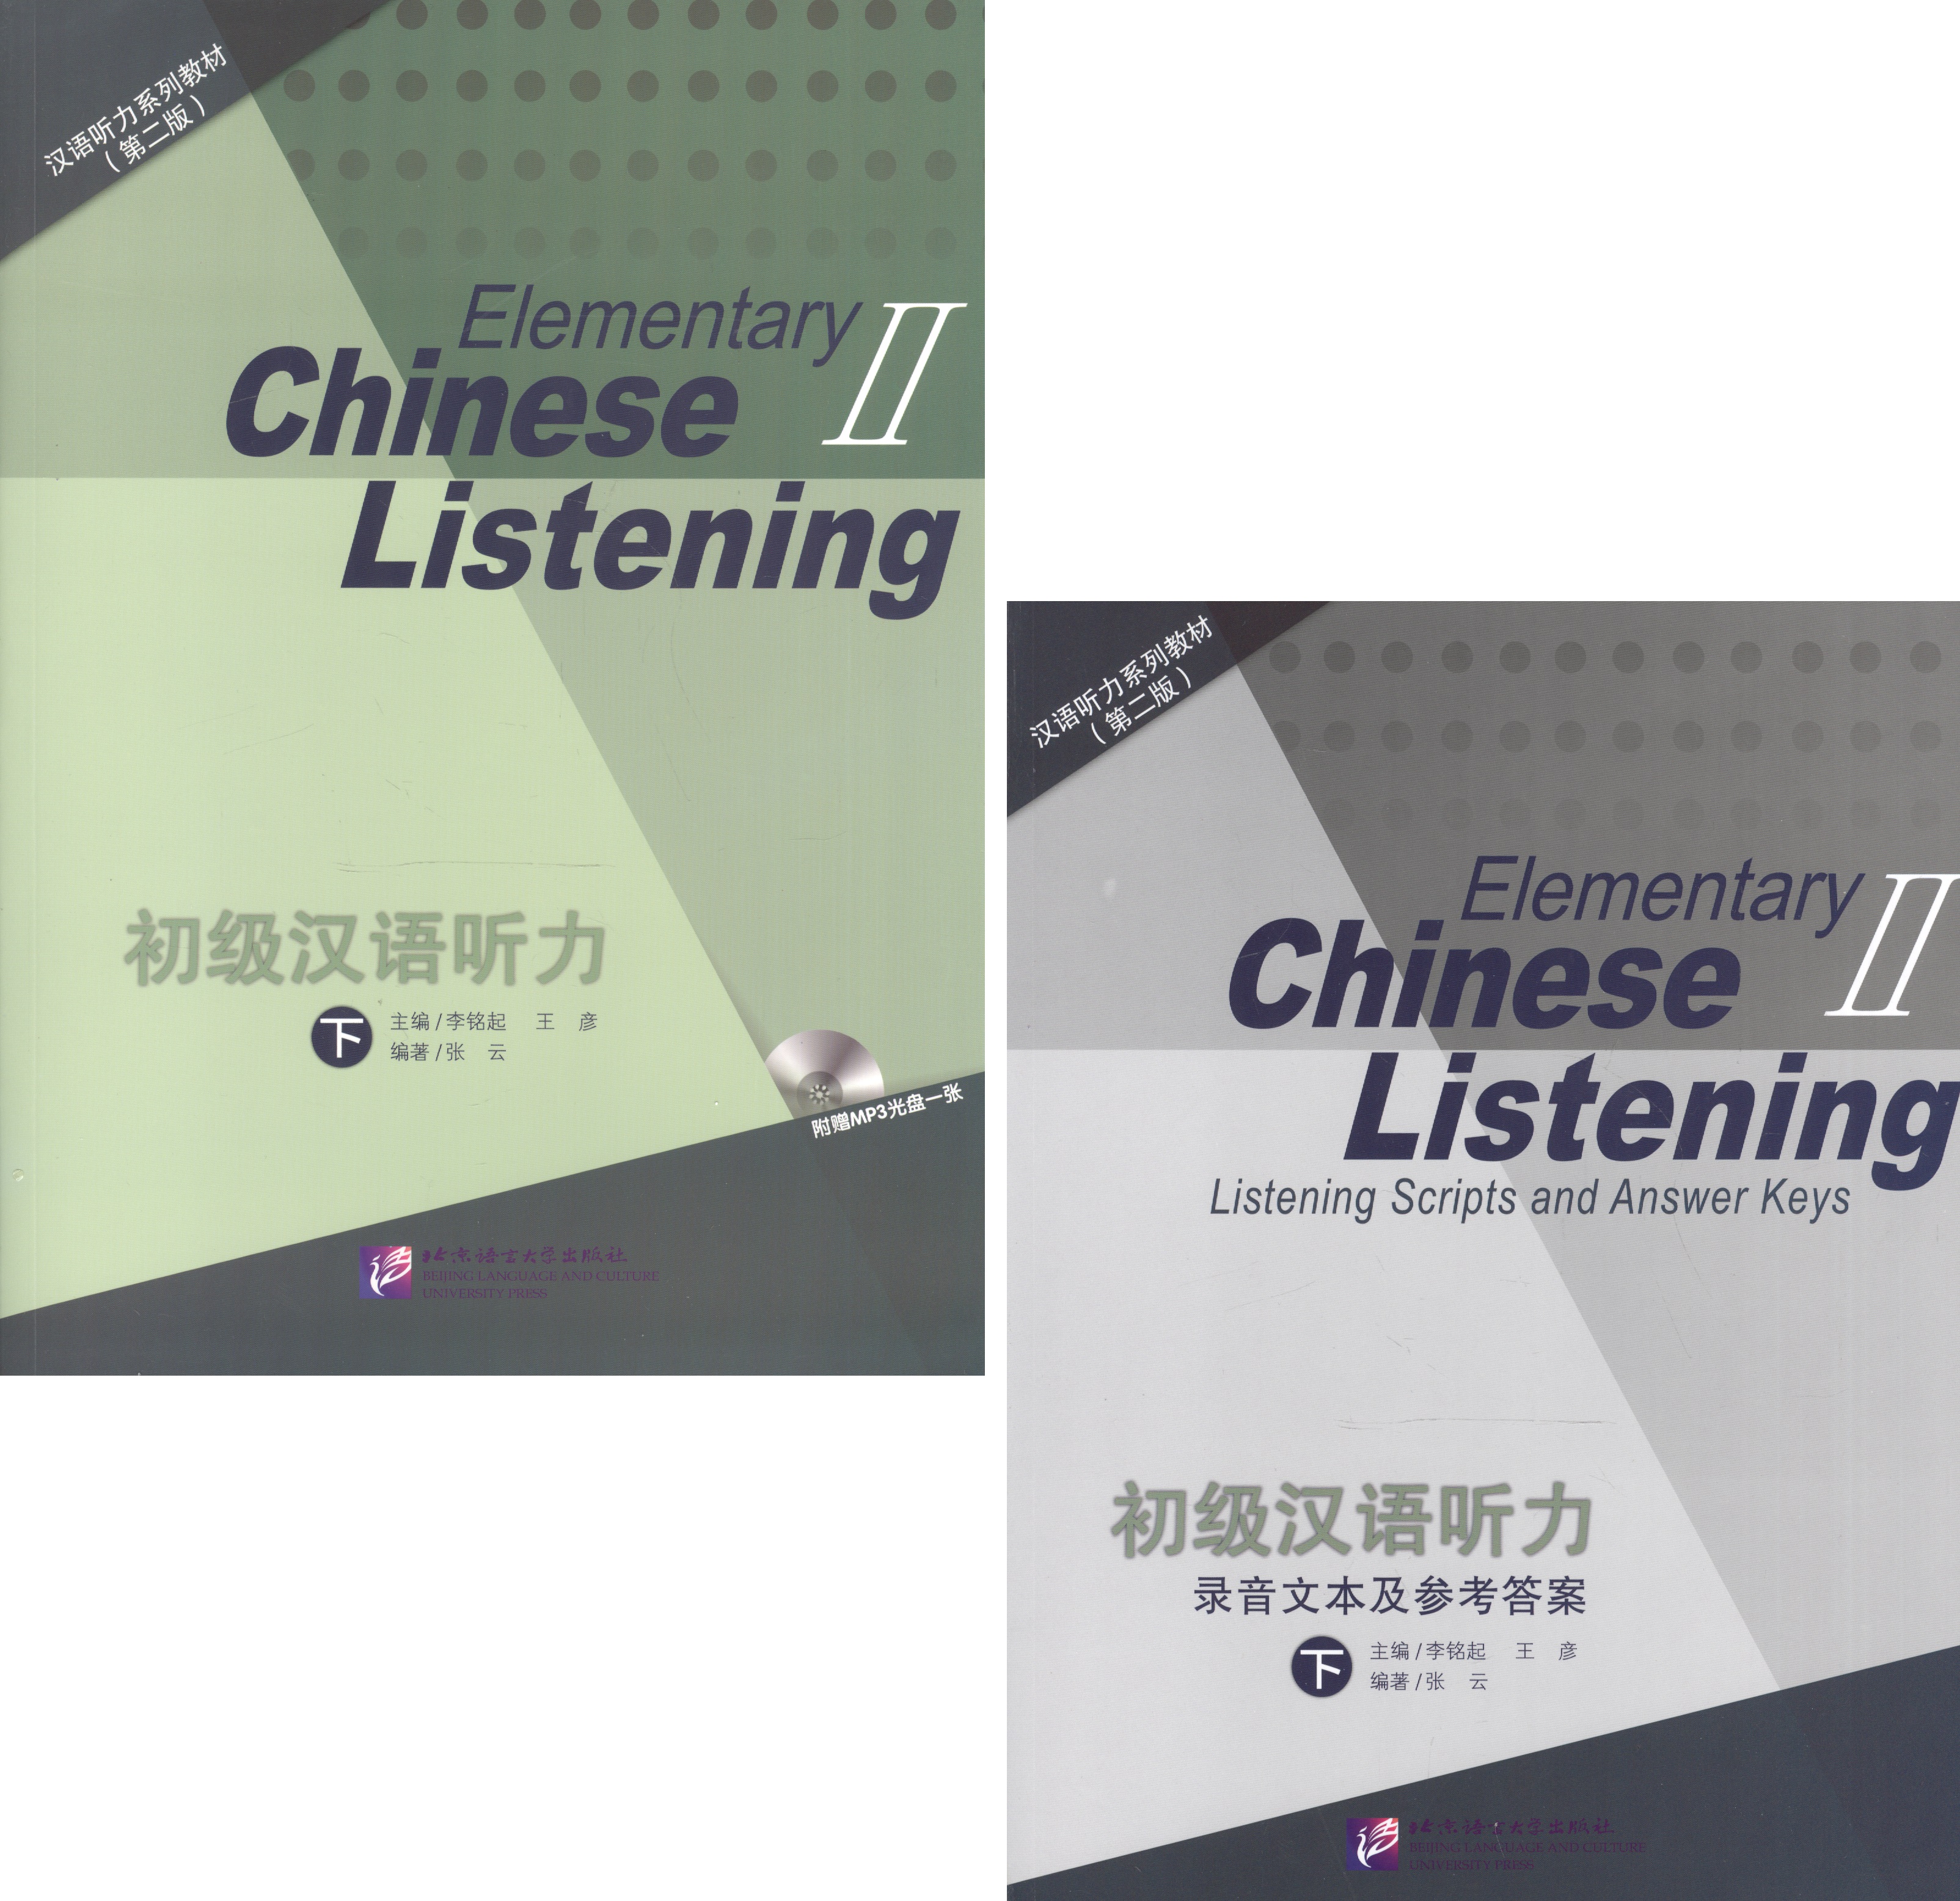 Elementary Chinese Listening II + MP3 CD hsk 600 chinese vocabulary level 1 3 hsk class series students test book pocket book chinese characters free shipping 2021 hot